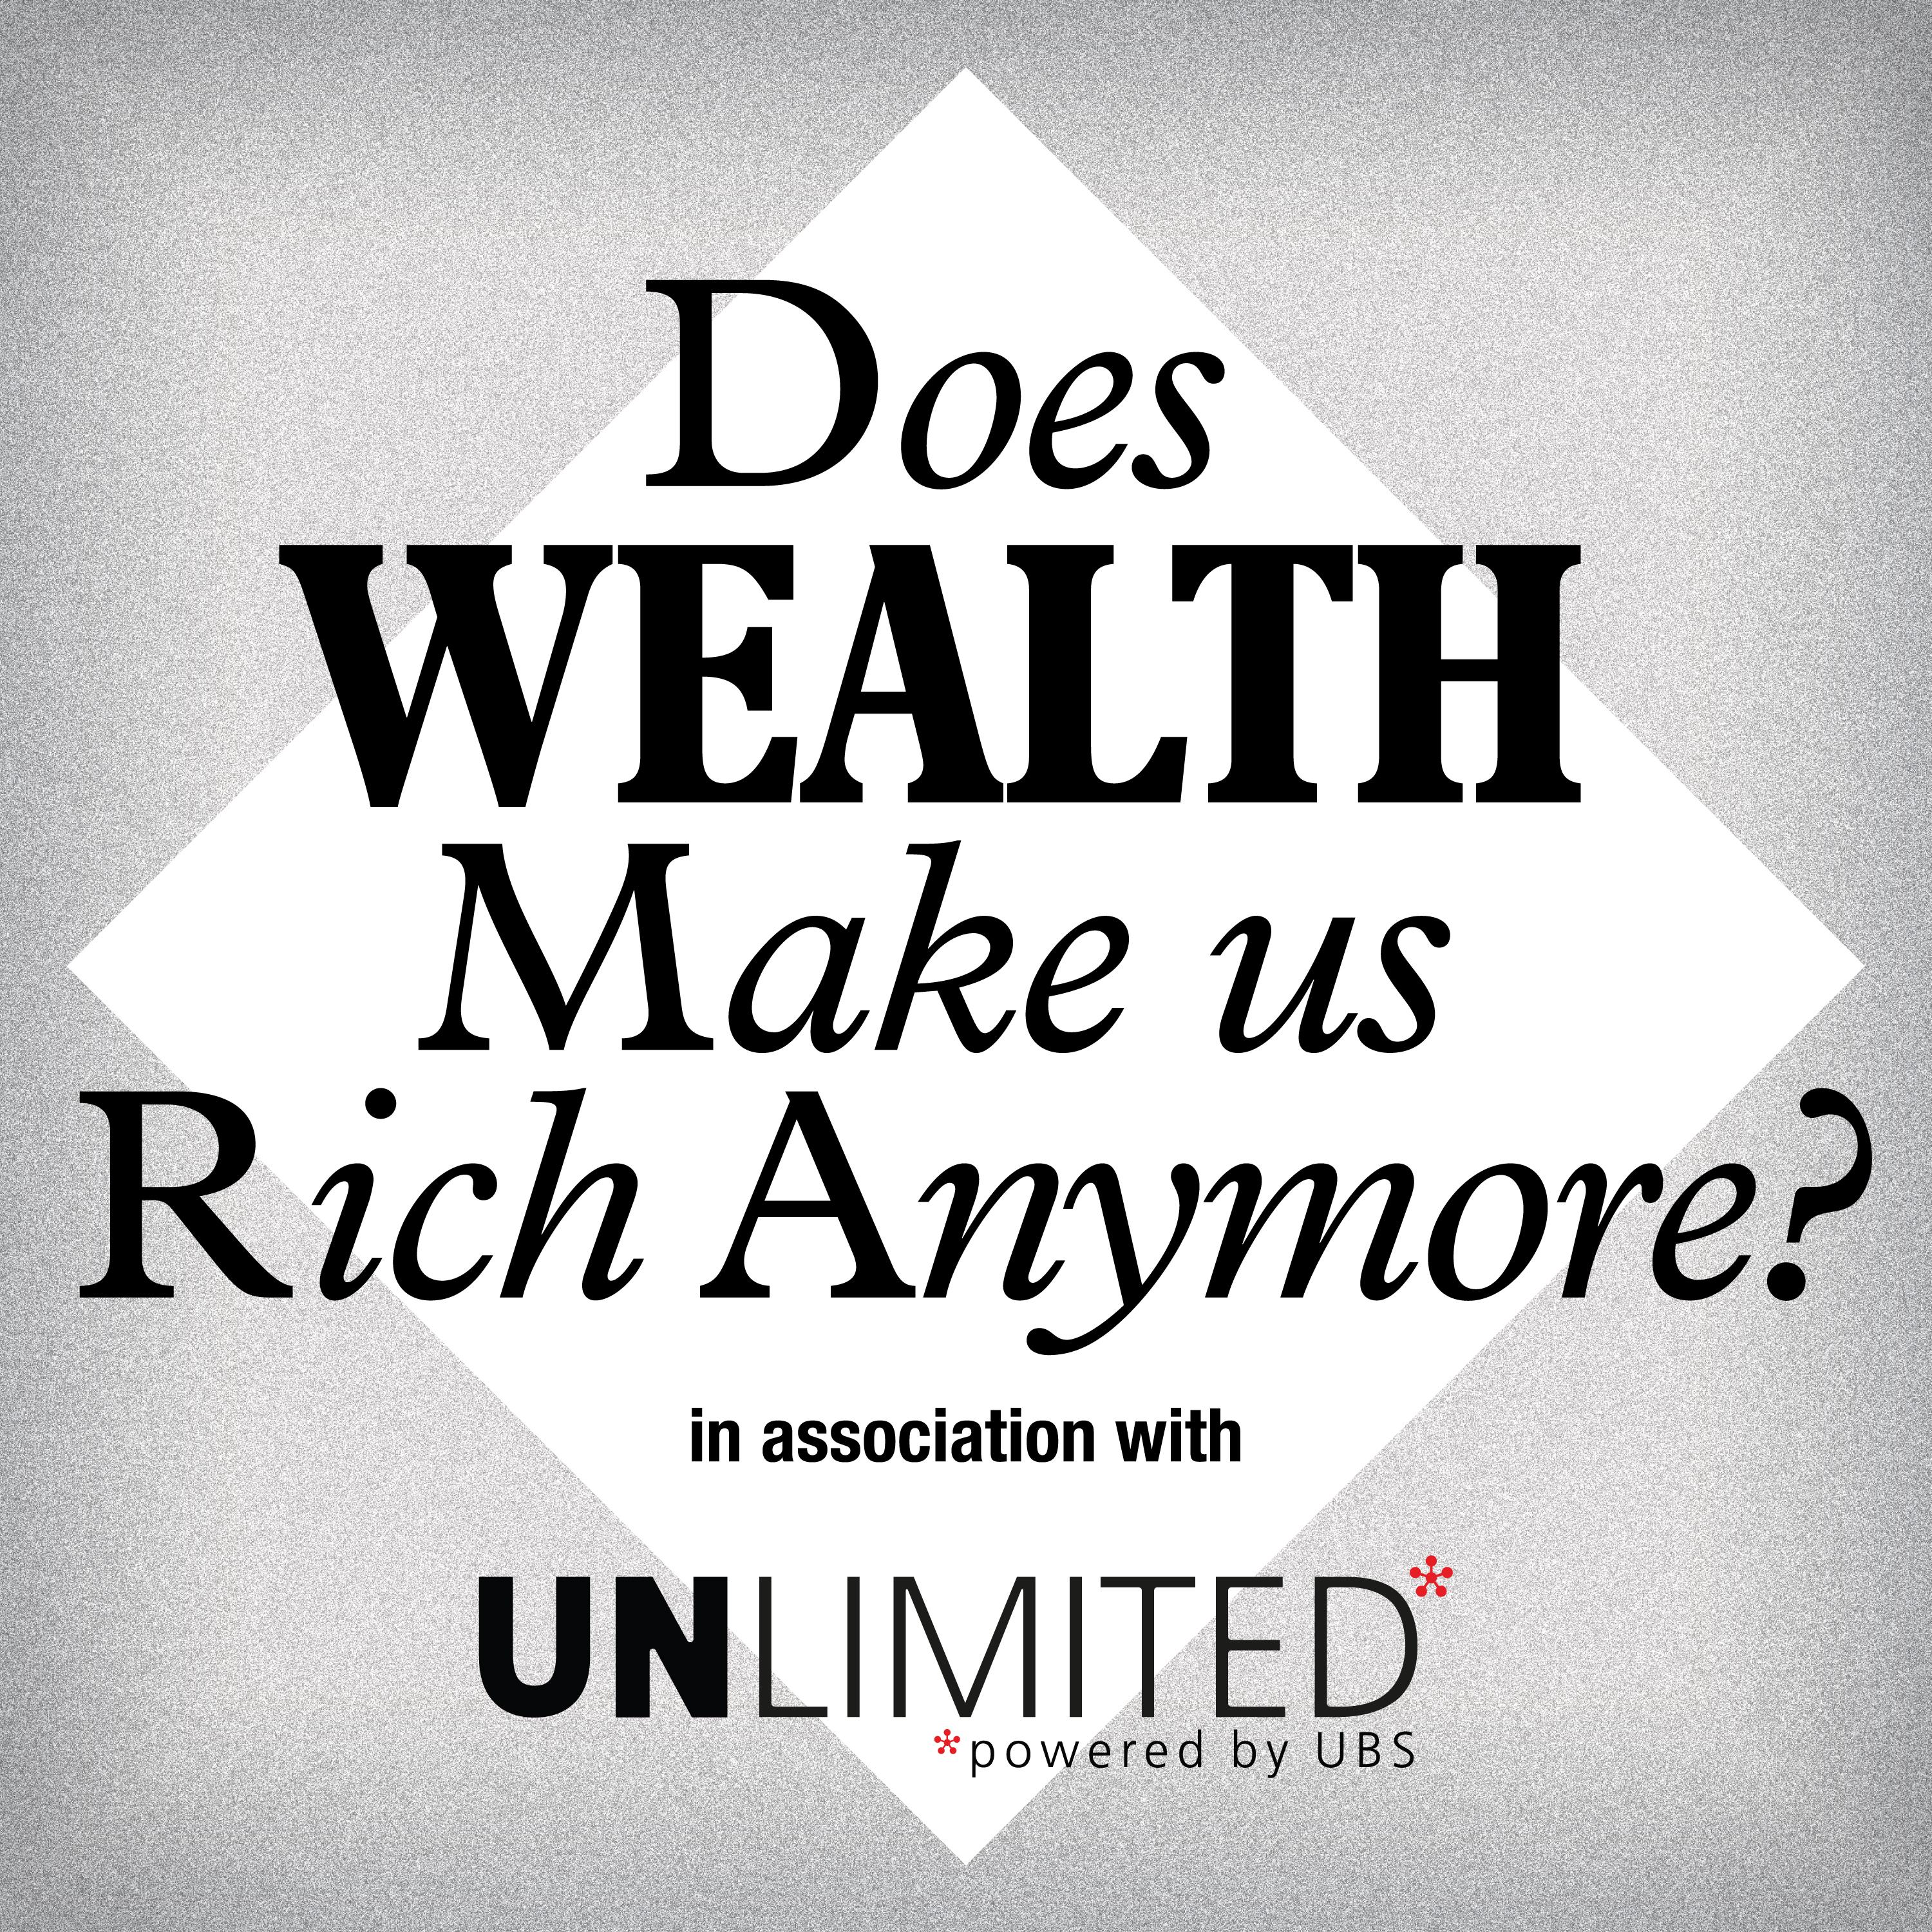 Does wealth make us rich anymore?